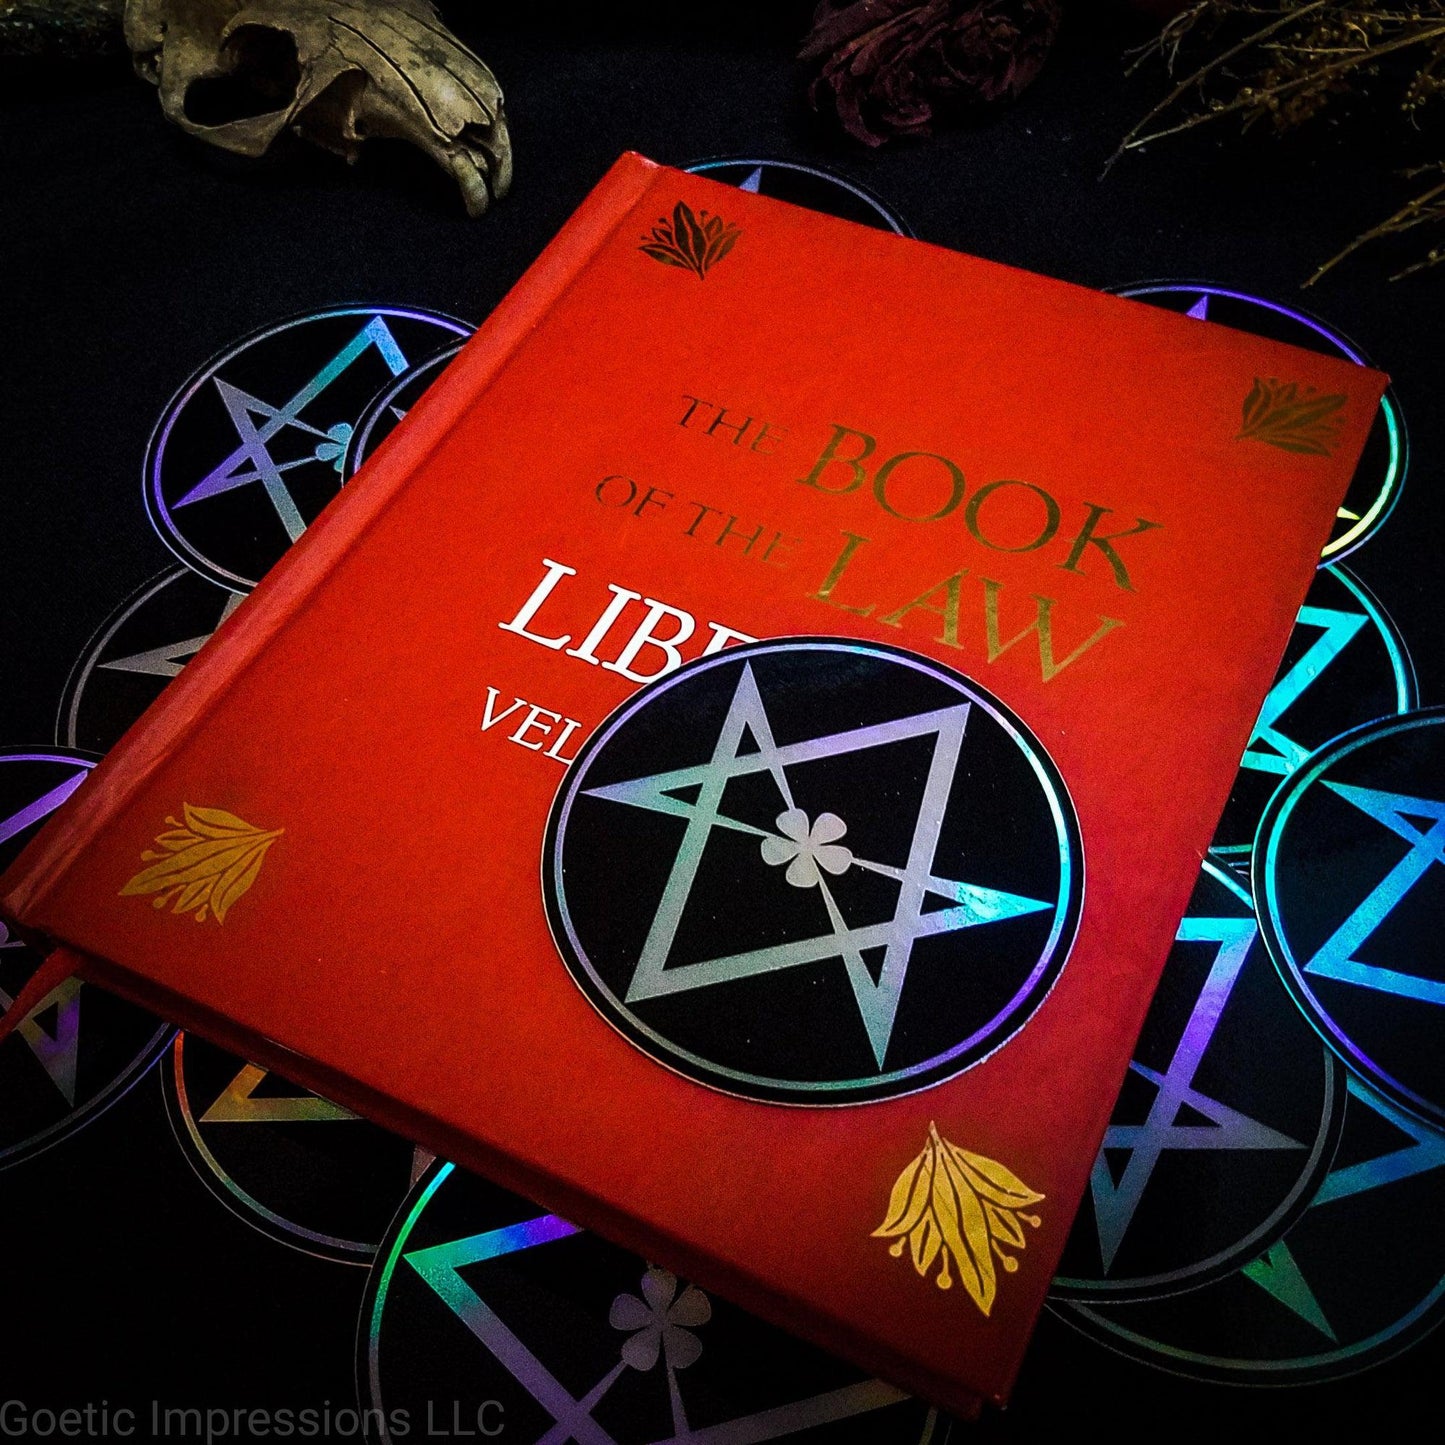 A three inch holographic sticker with a black background and a white symbol of a Unicursal Hexagram rests on top of a red book titled Book of the Law, Liber Al Vel Legis. The book is placed on a pile of the stickers. The holographic paper shines in a wide arrange of rainbow colors when the light catches it at different angles.